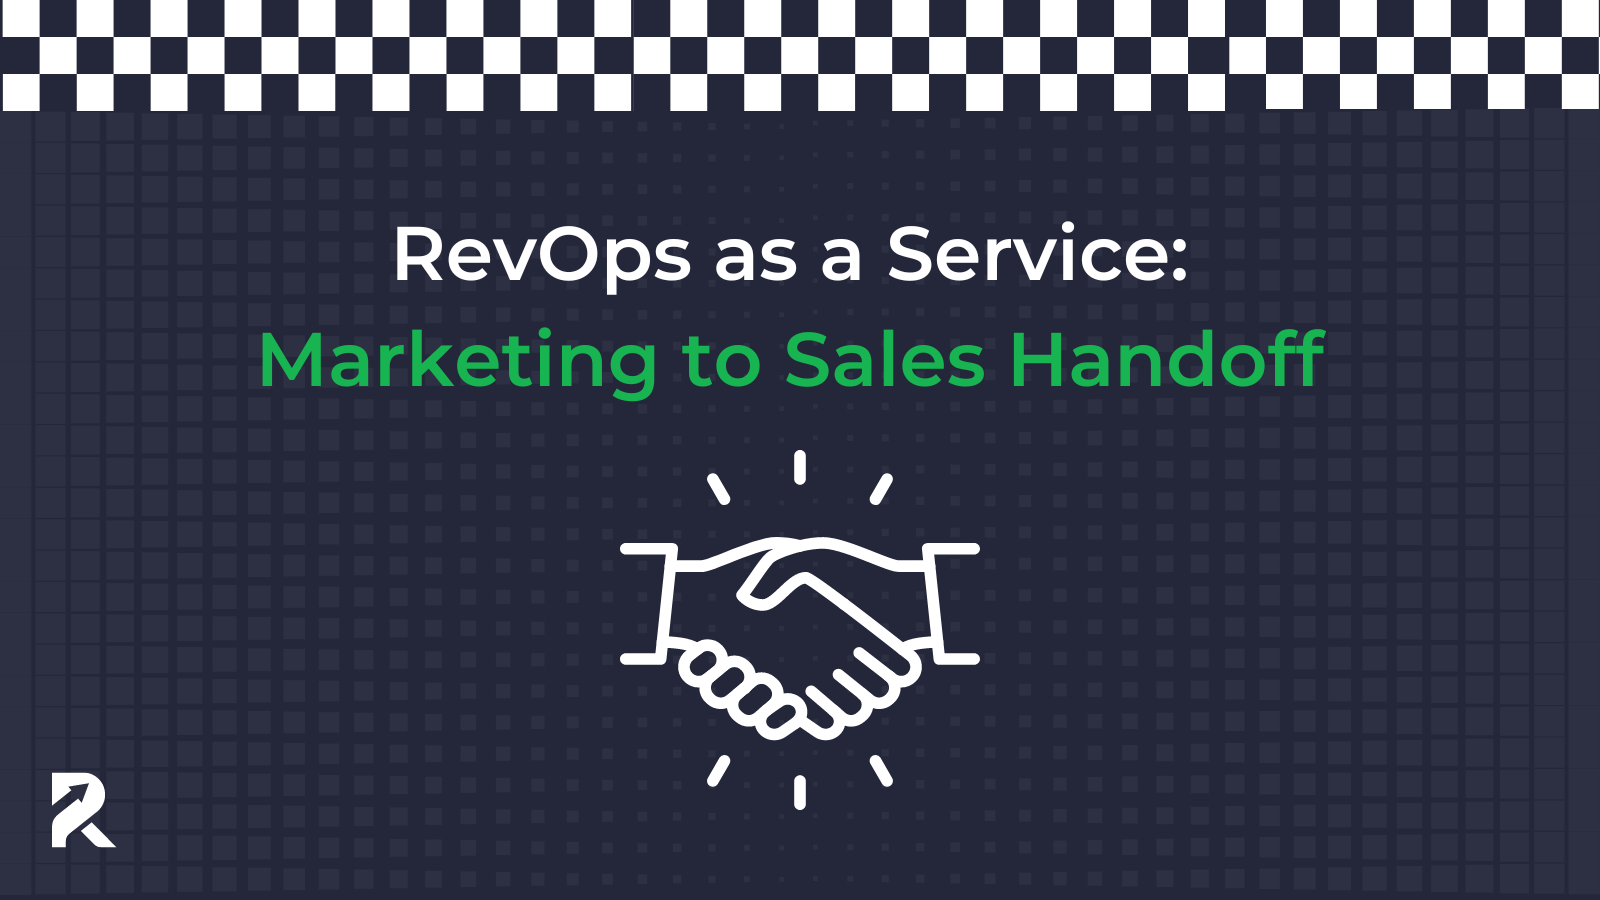 RevOps as a Service: Marketing to Sales Handoff